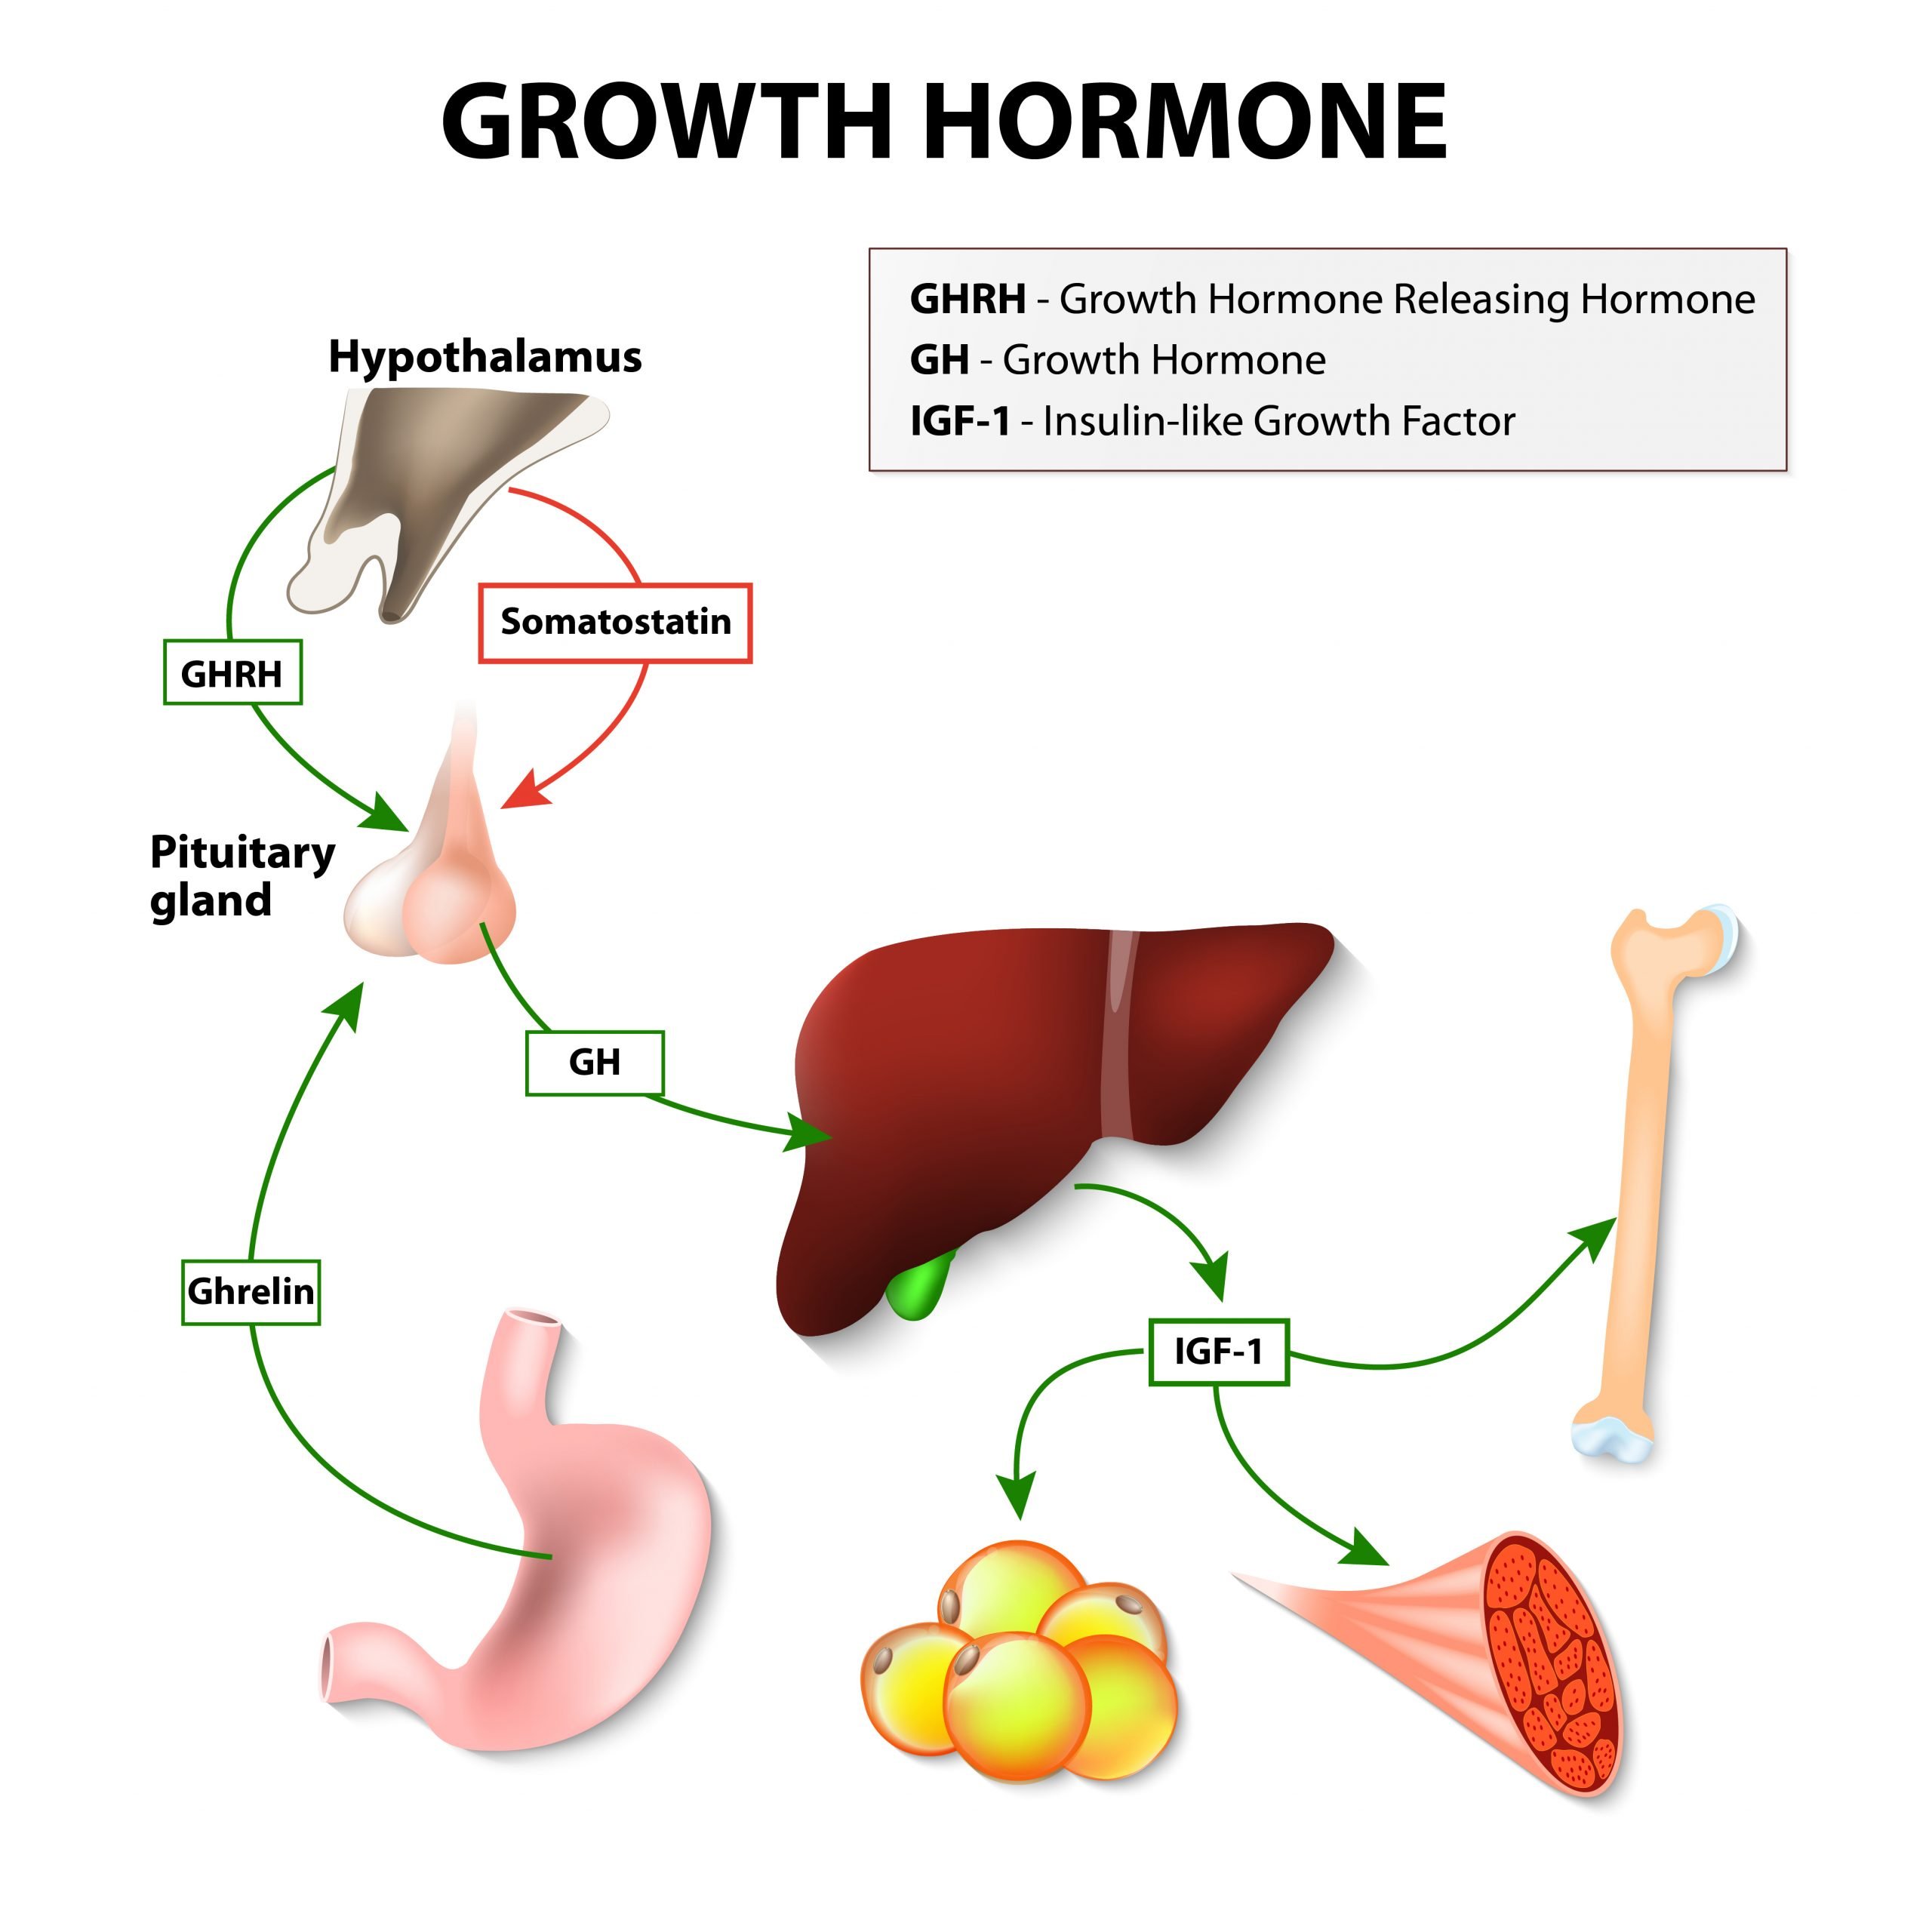 Functions of Growth Hormone (GH)